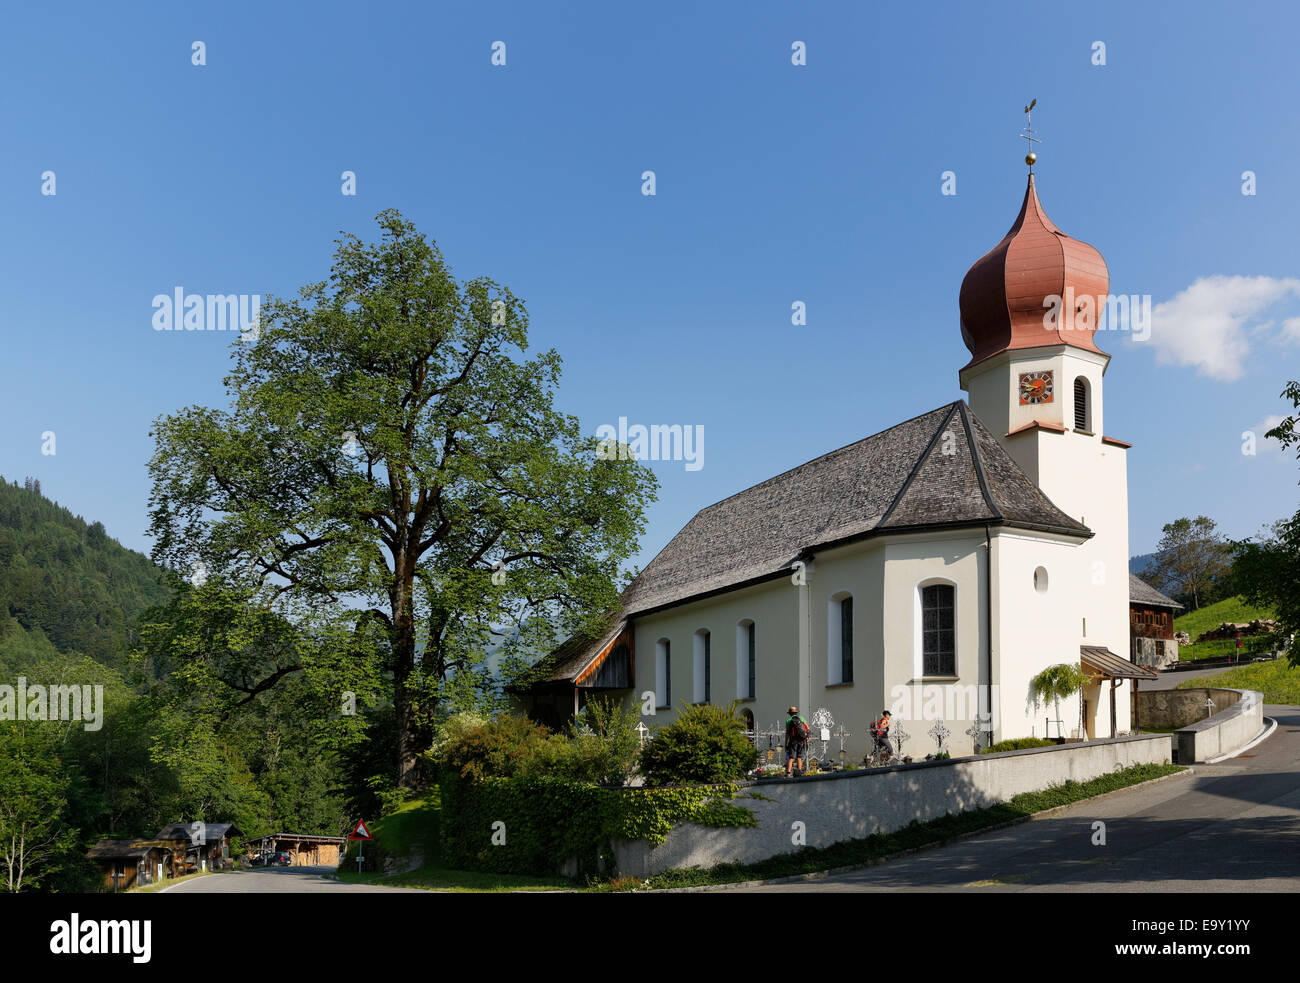 Filial Church of St. Catherine and a Wych elm or Scots elm in Marul, community of Raggal, Großes Walsertal, Vorarlberg, Austria Stock Photo